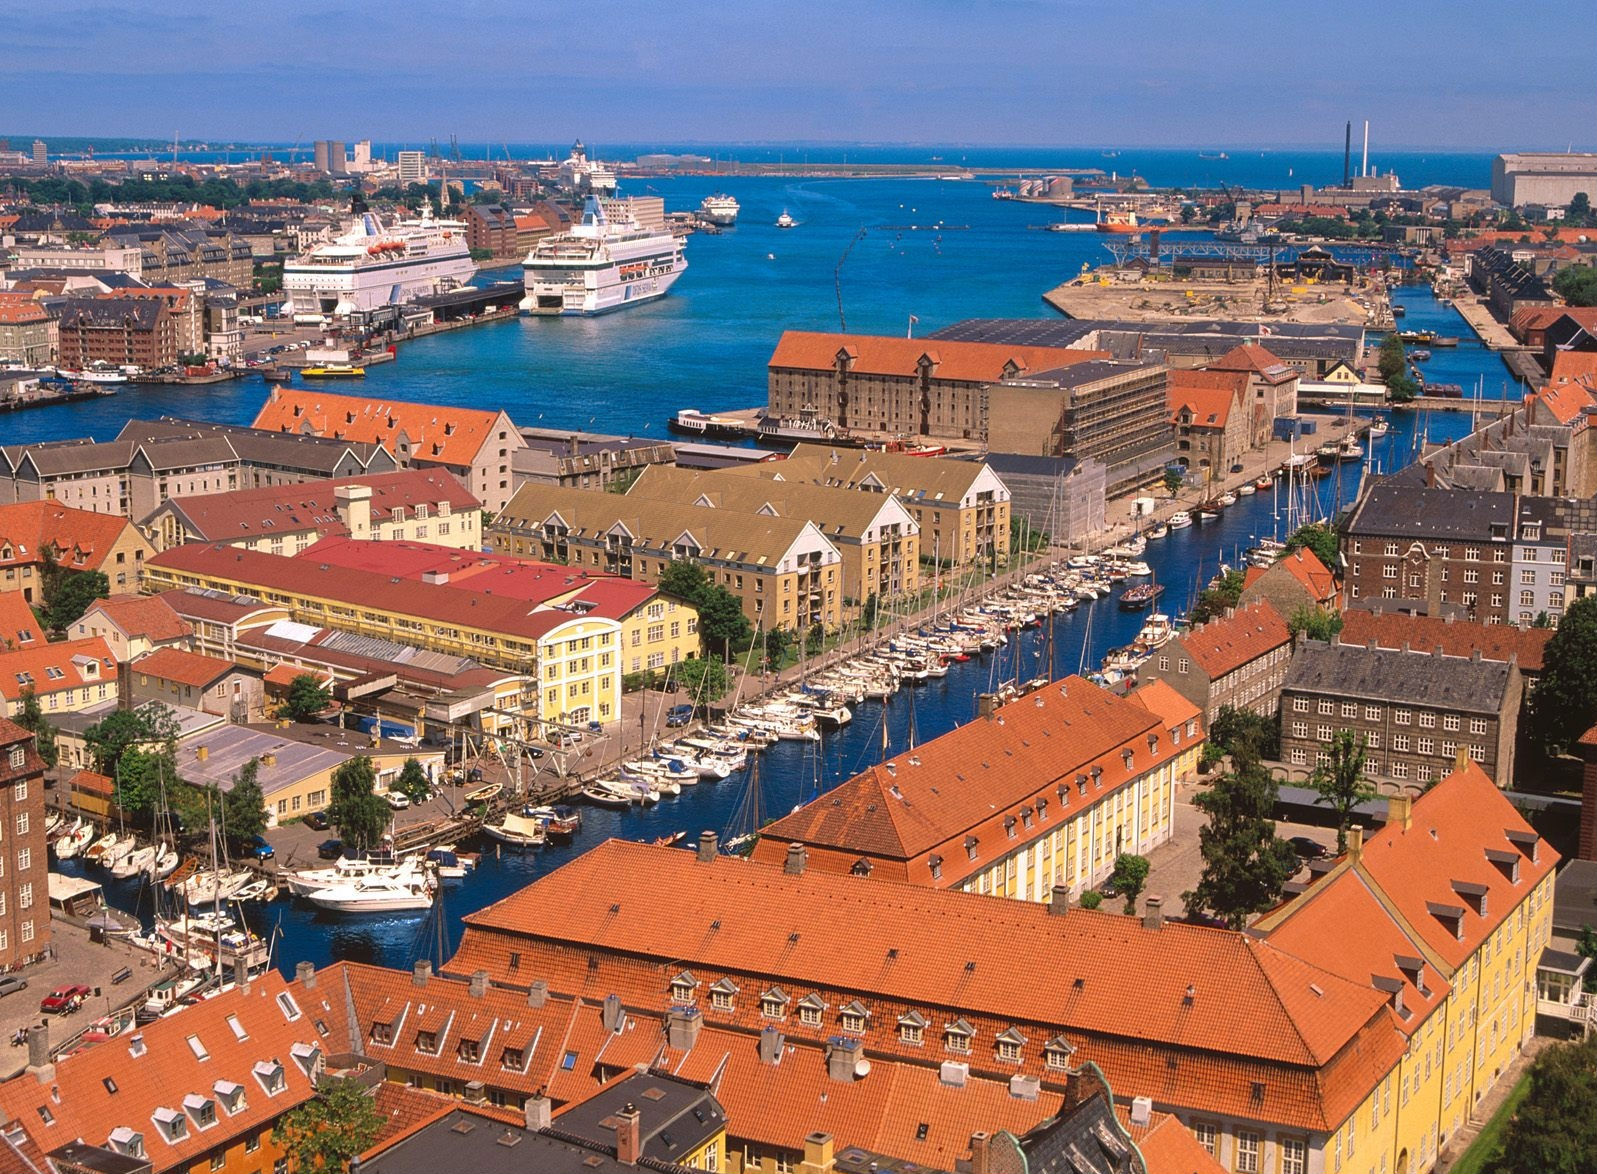 Copenhagen Harbor in Denmark - scenic view of boats and buildings along the water.